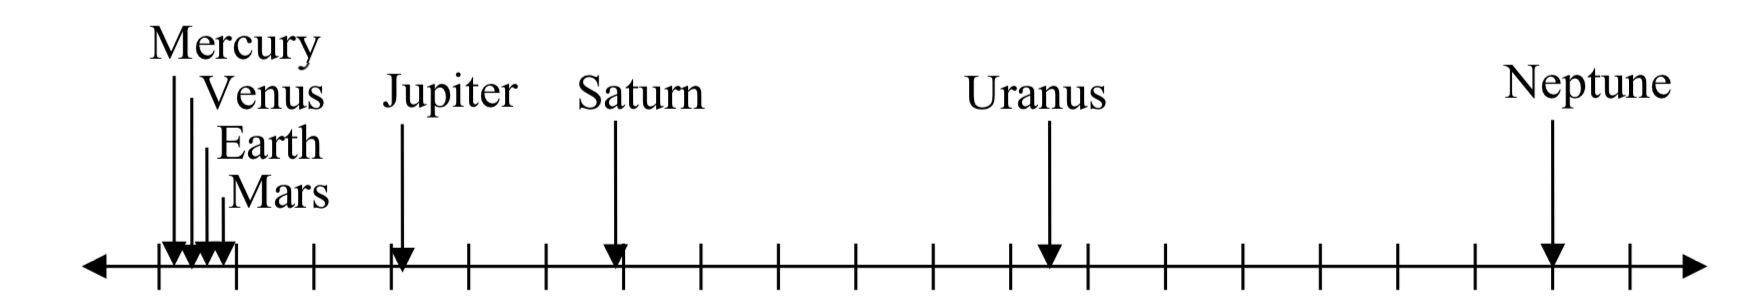 A number line labeled distance from 0 to 4500 with equally spaced tick marks every 250. There are arrows pointing to locations for each planet. There are four arrows between 0 and 250 for Mercury Venus Earth and Mars, then an arrow at 779 for Jupiter, at 1430 for Saturn, at 2880 for Uranus, and at 4500 for Neptune.